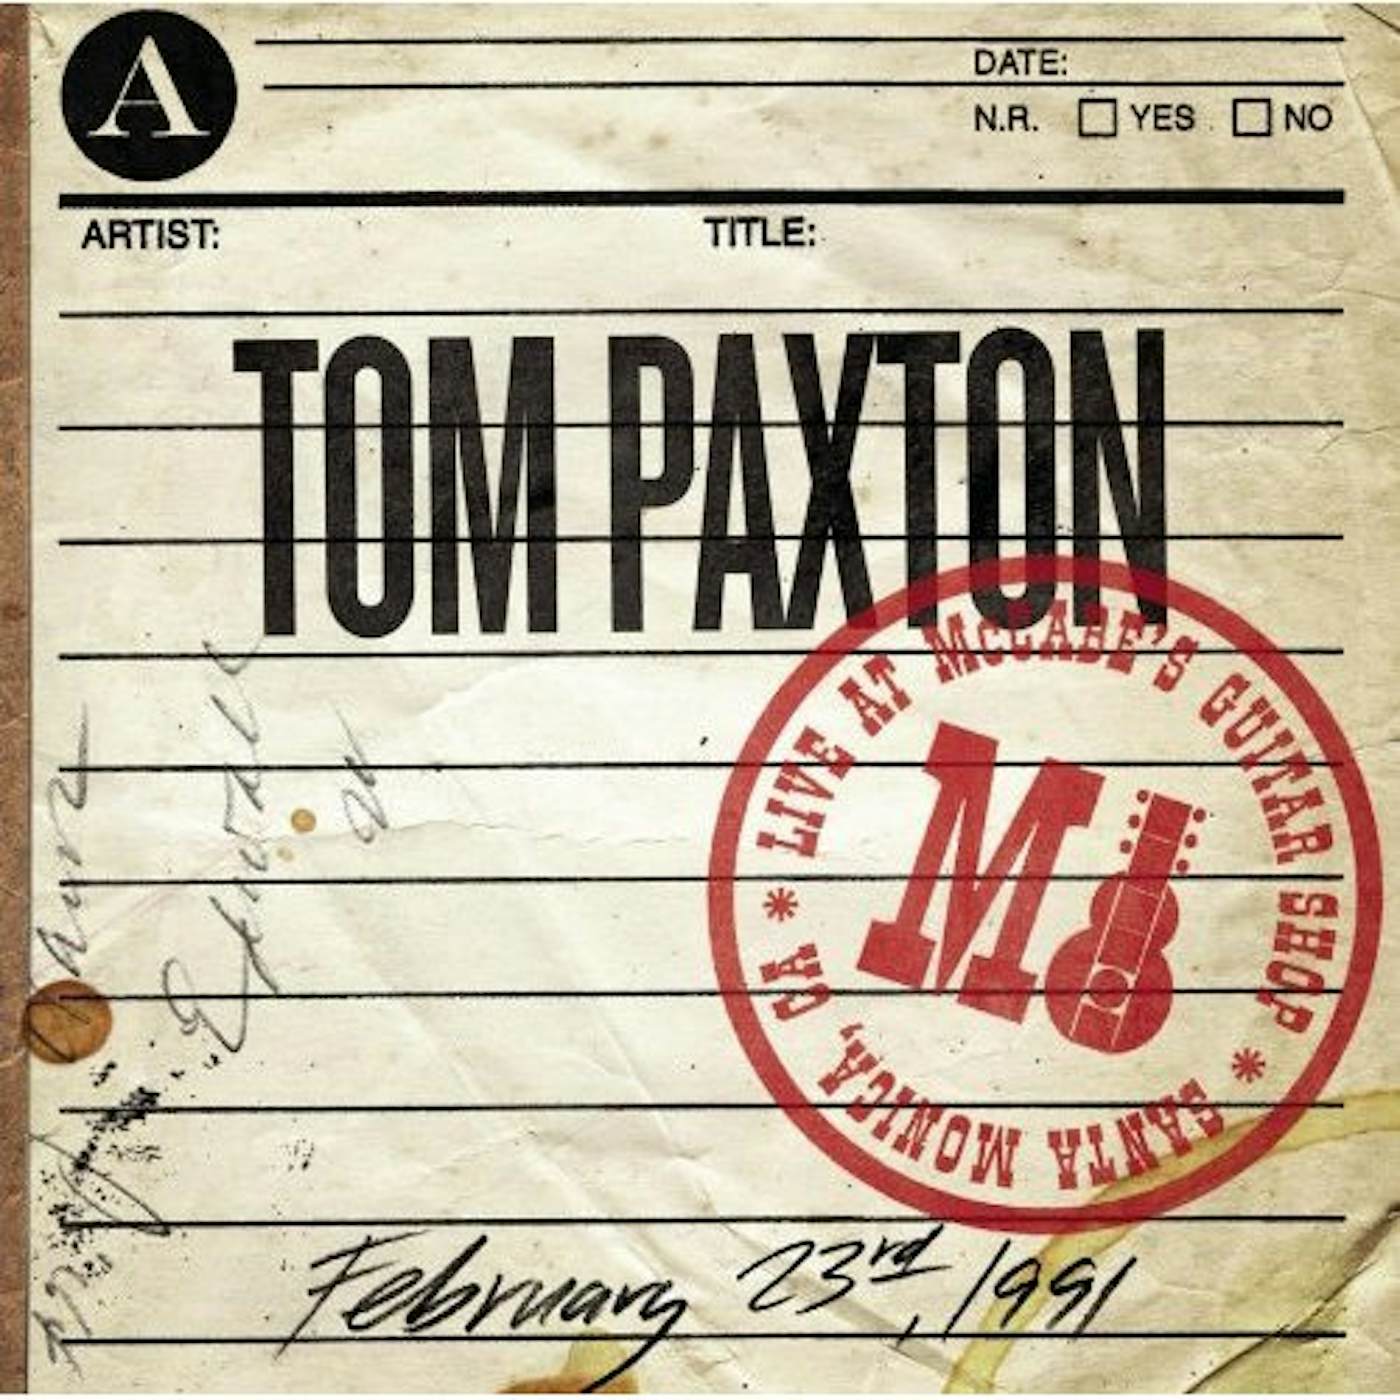 Tom Paxton LIVE AT MCCABE'S GUITAR SHOP CD